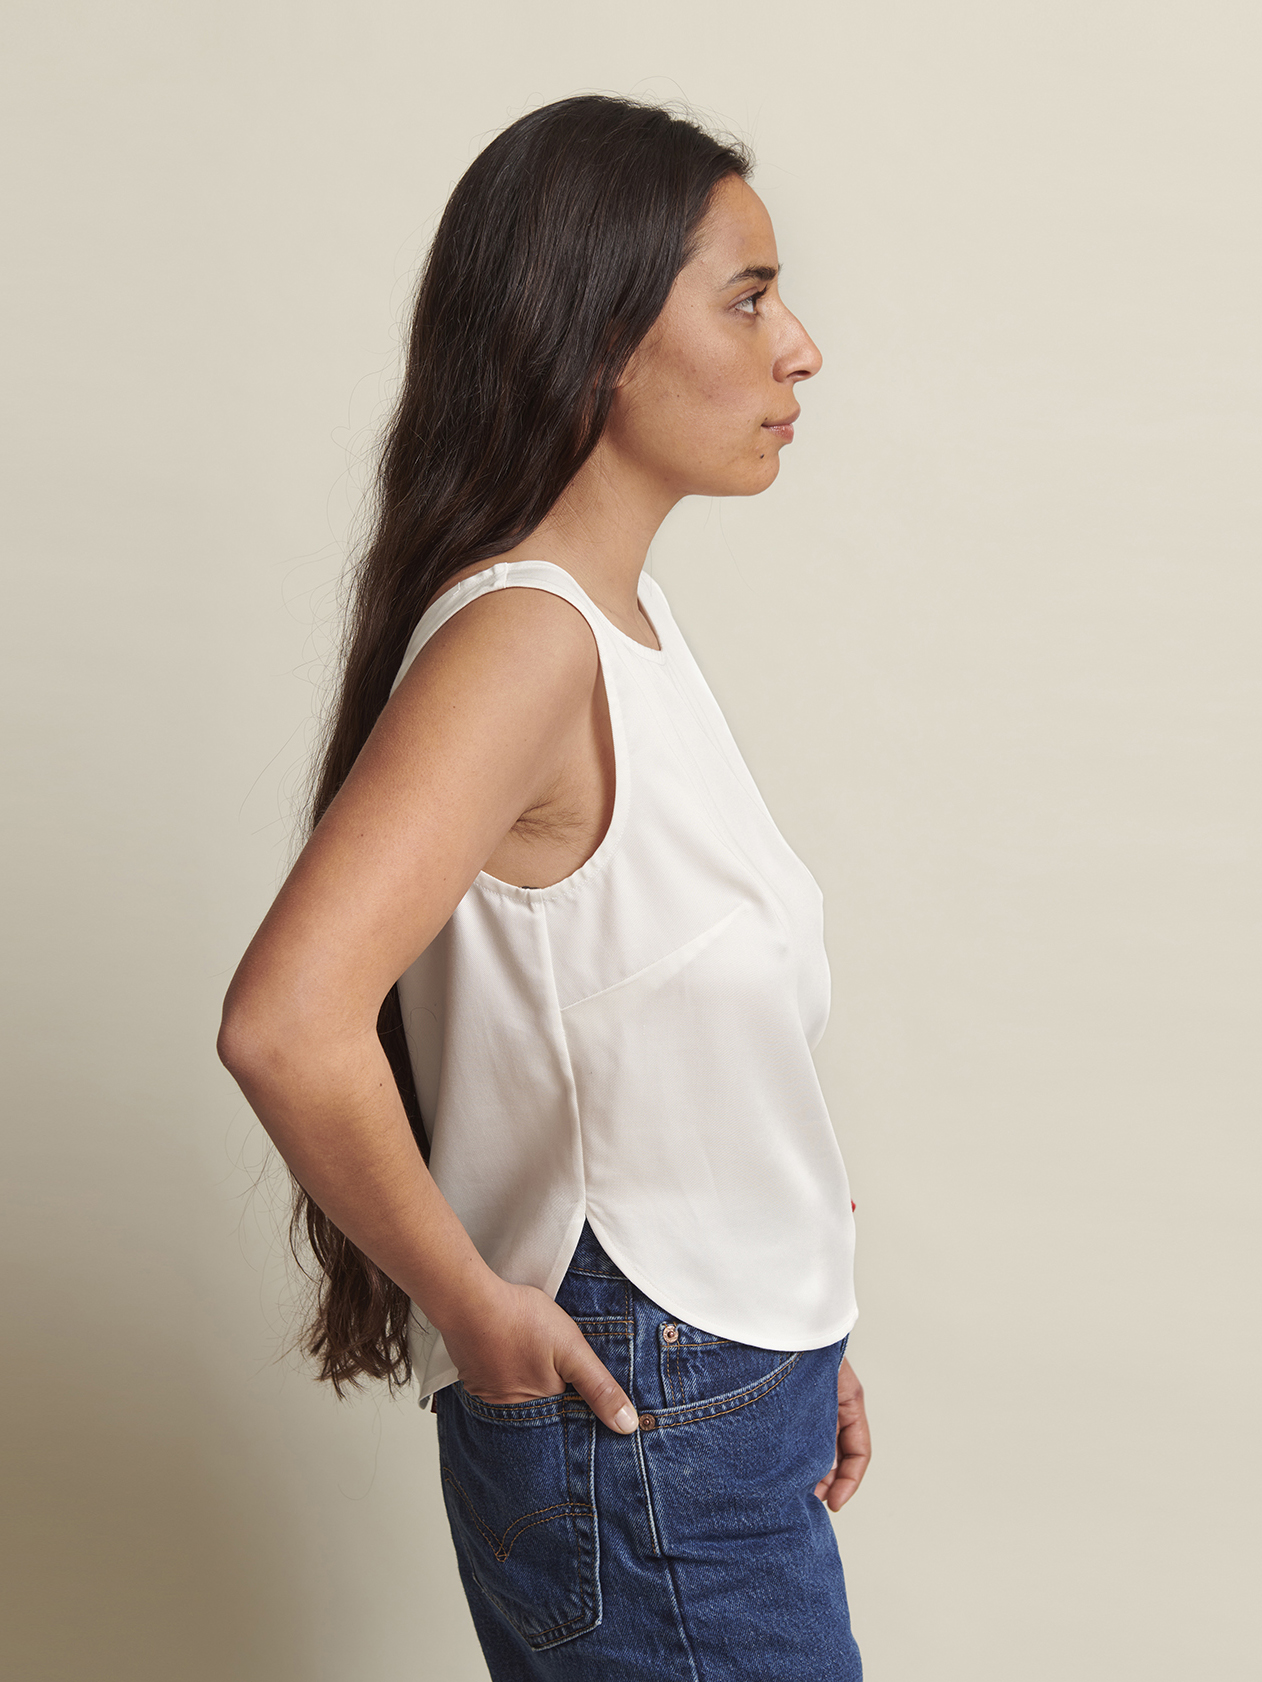 The Swoop Tank in 'Polished White' Lyocell | NAOMI NOMI